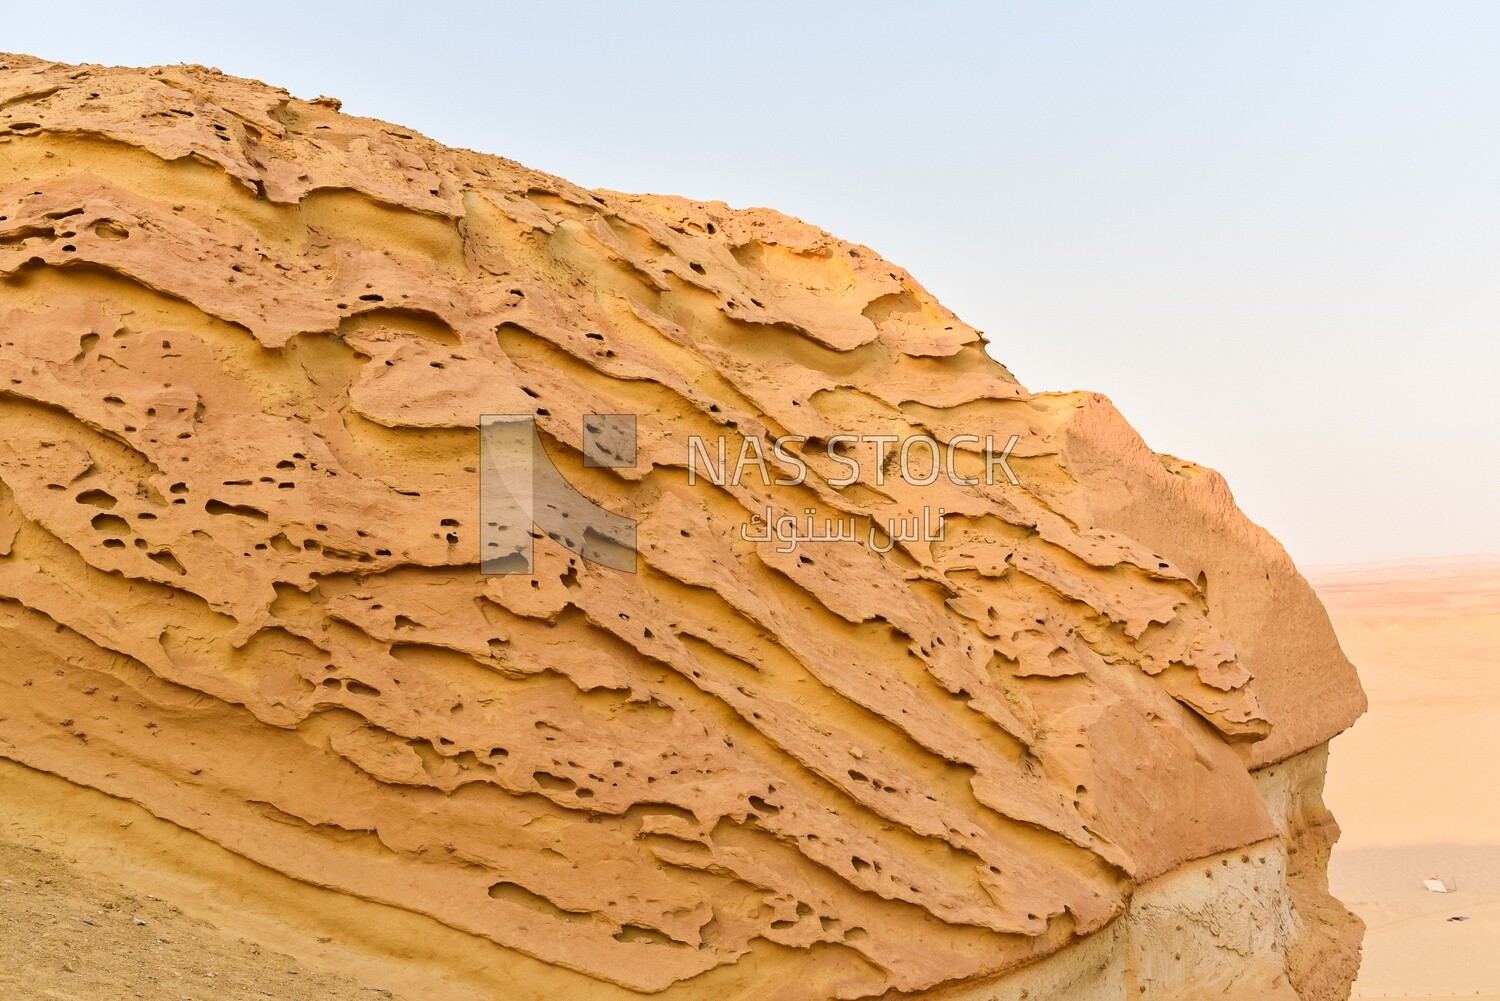 Sandstone texture resulting from erosion in Wadi El Hitan, Egypt